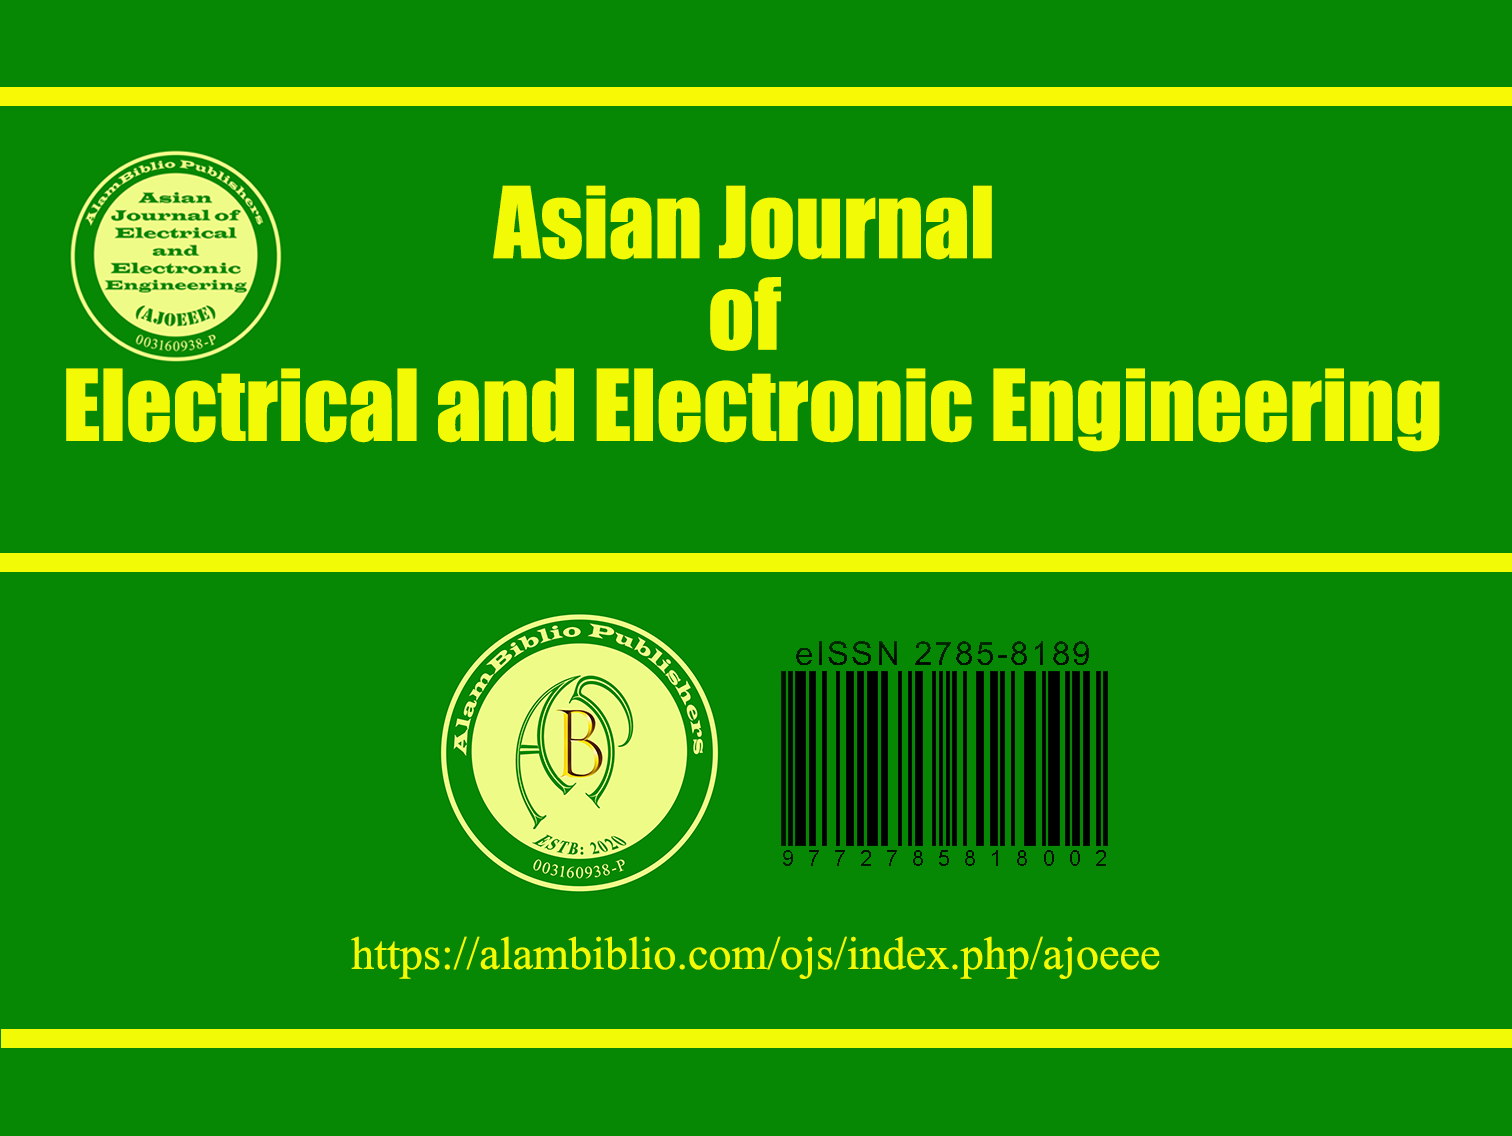 Asian Journal of Electrical and Electronic Engineering (AJoEEE)